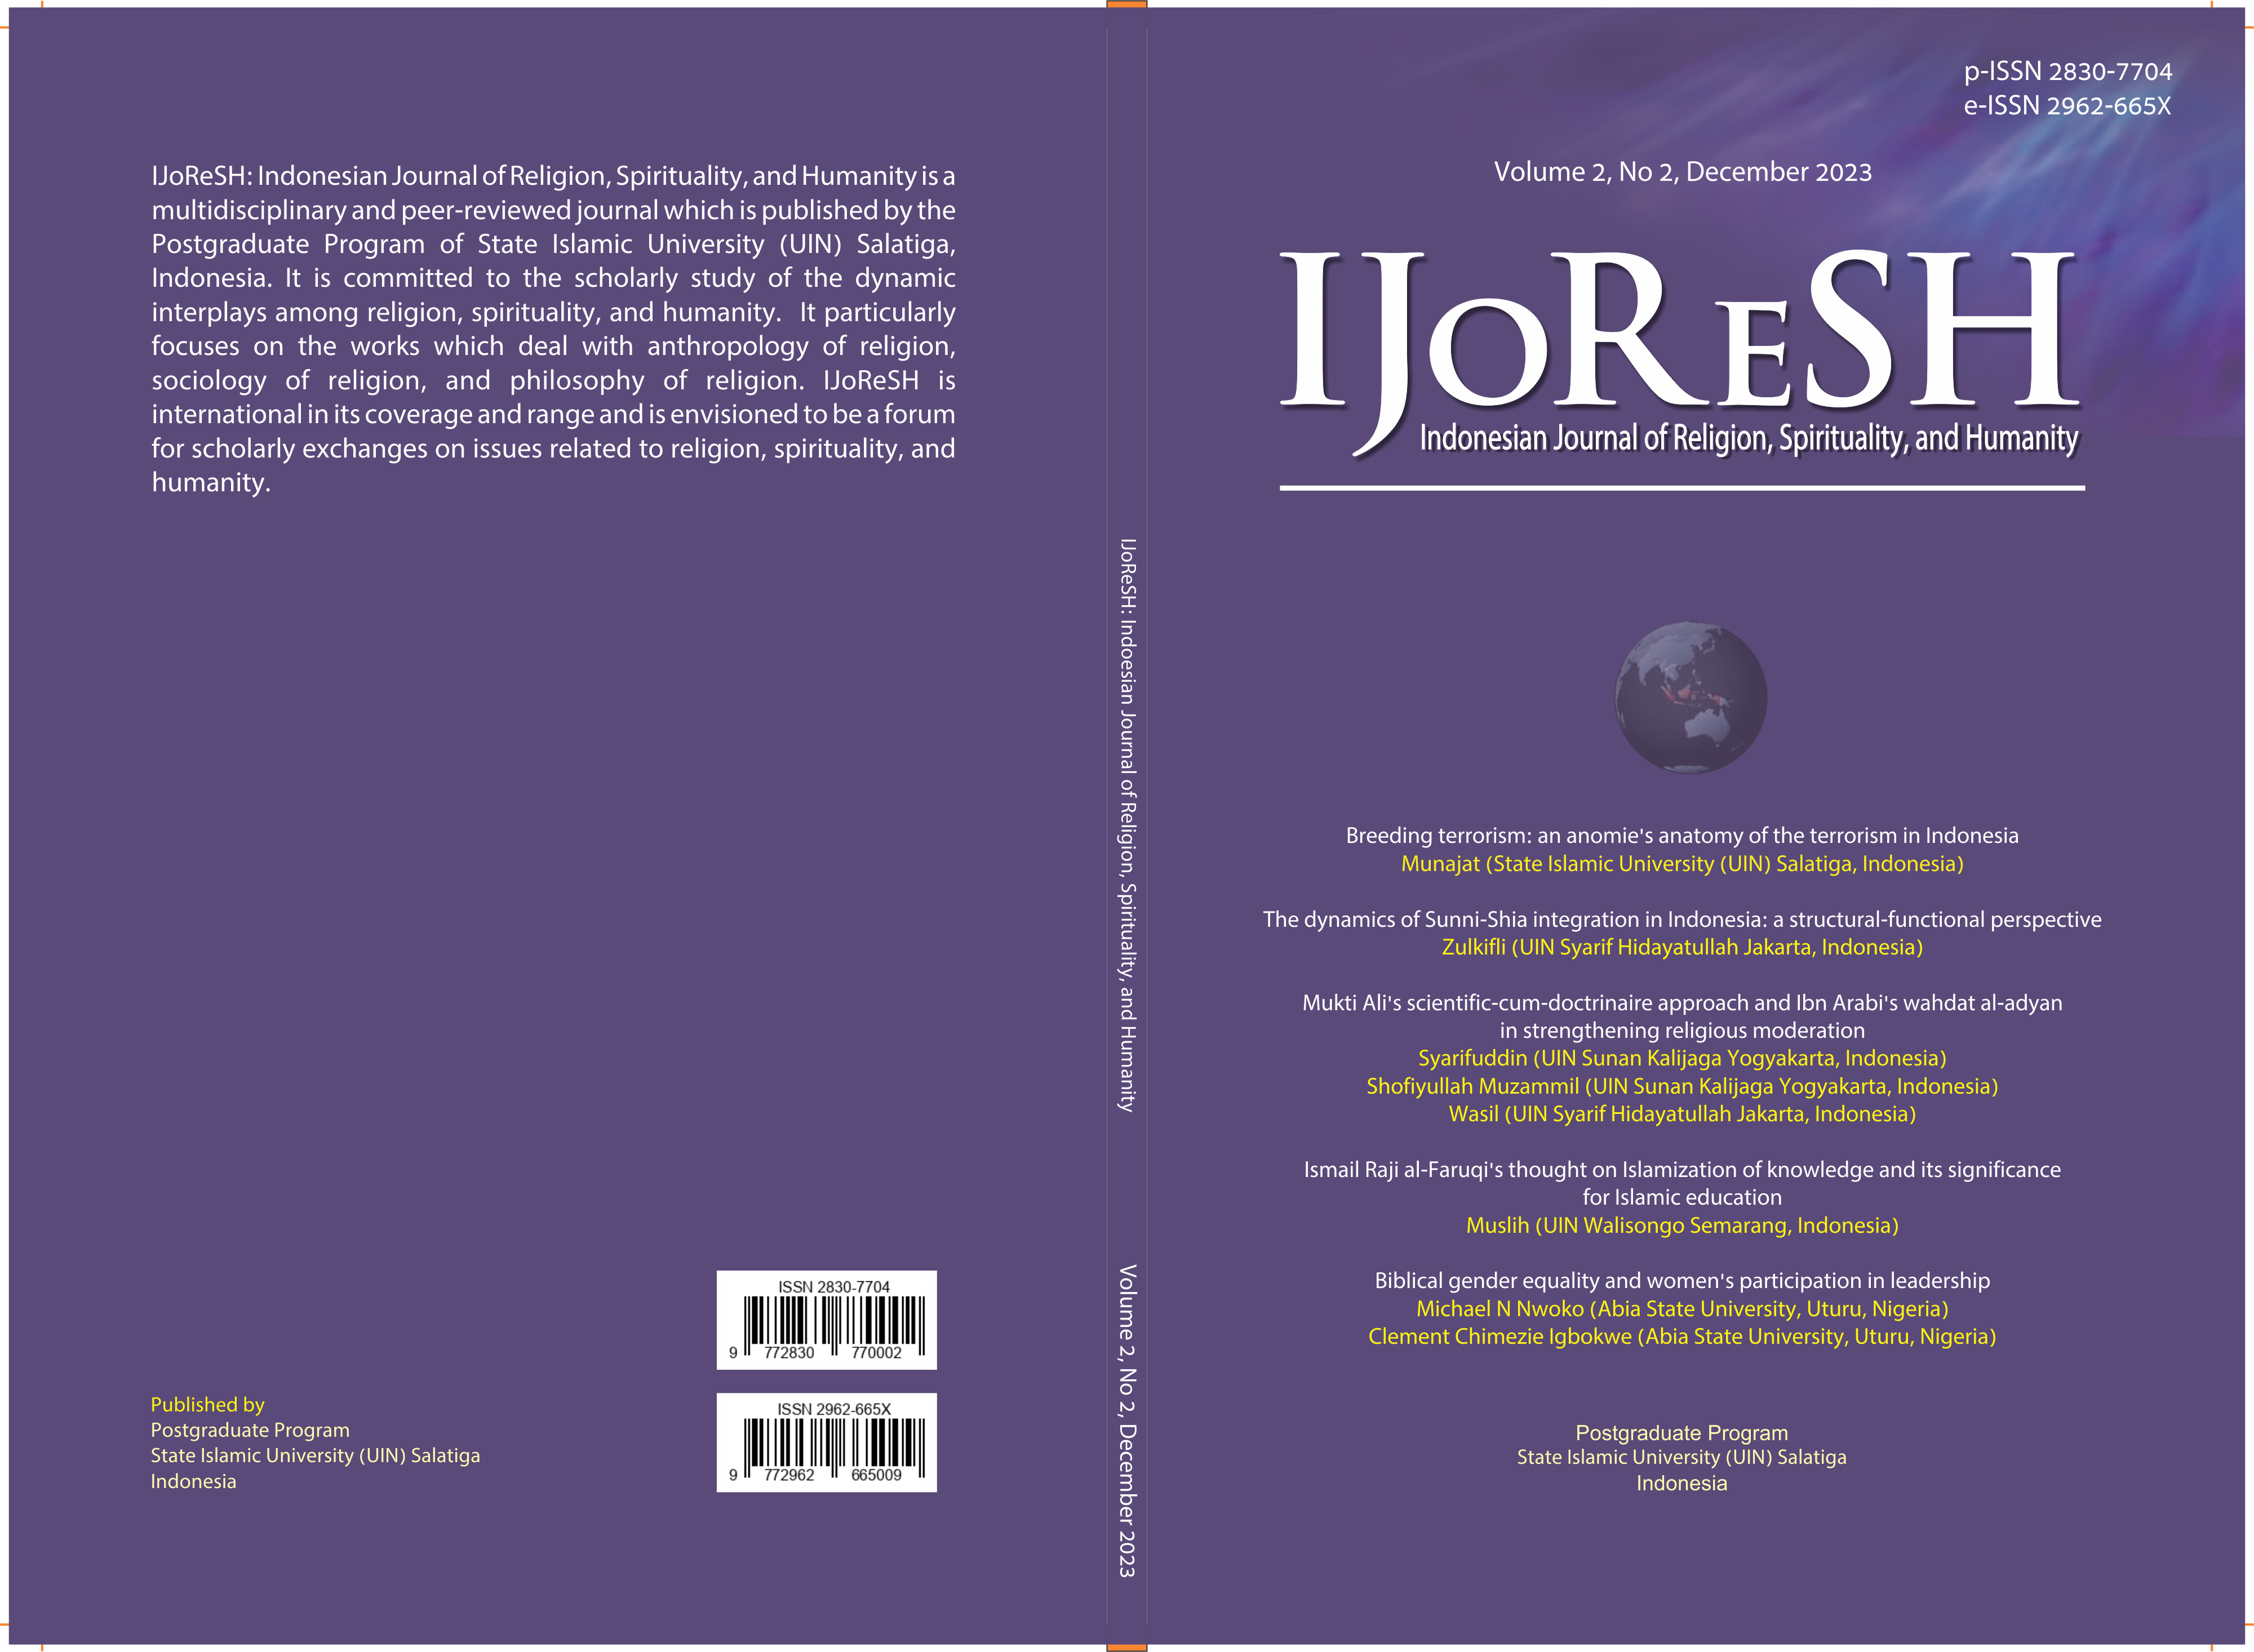 					View Vol. 2 No. 2 (2023): Indonesian Journal of Religion, Spirituality, and Humanity
				